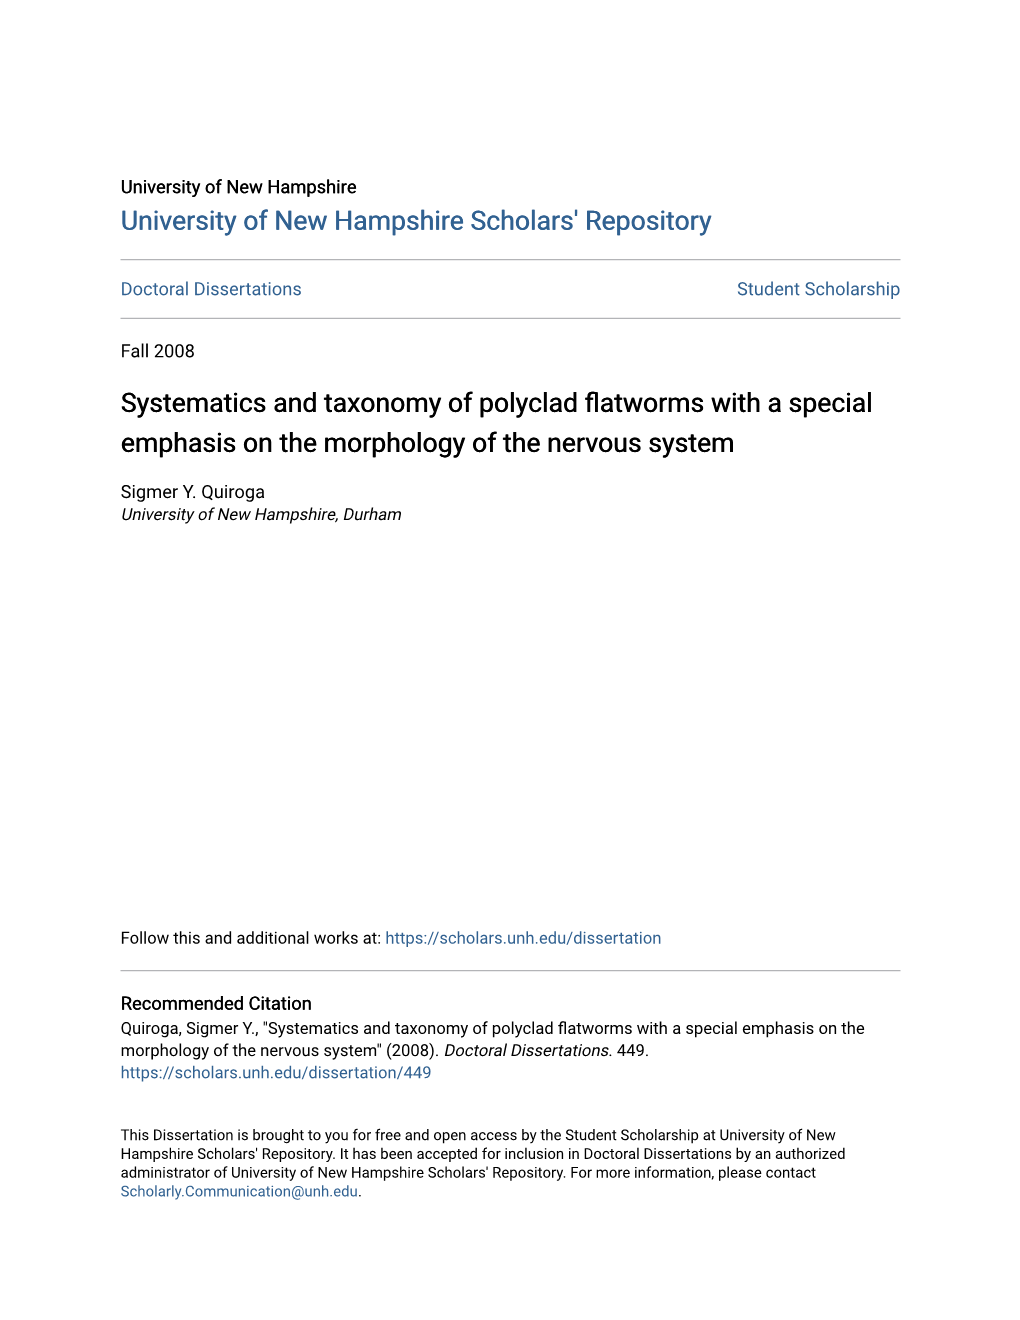 Systematics and Taxonomy of Polyclad Flatworms with a Special Emphasis on the Morphology of the Nervous System